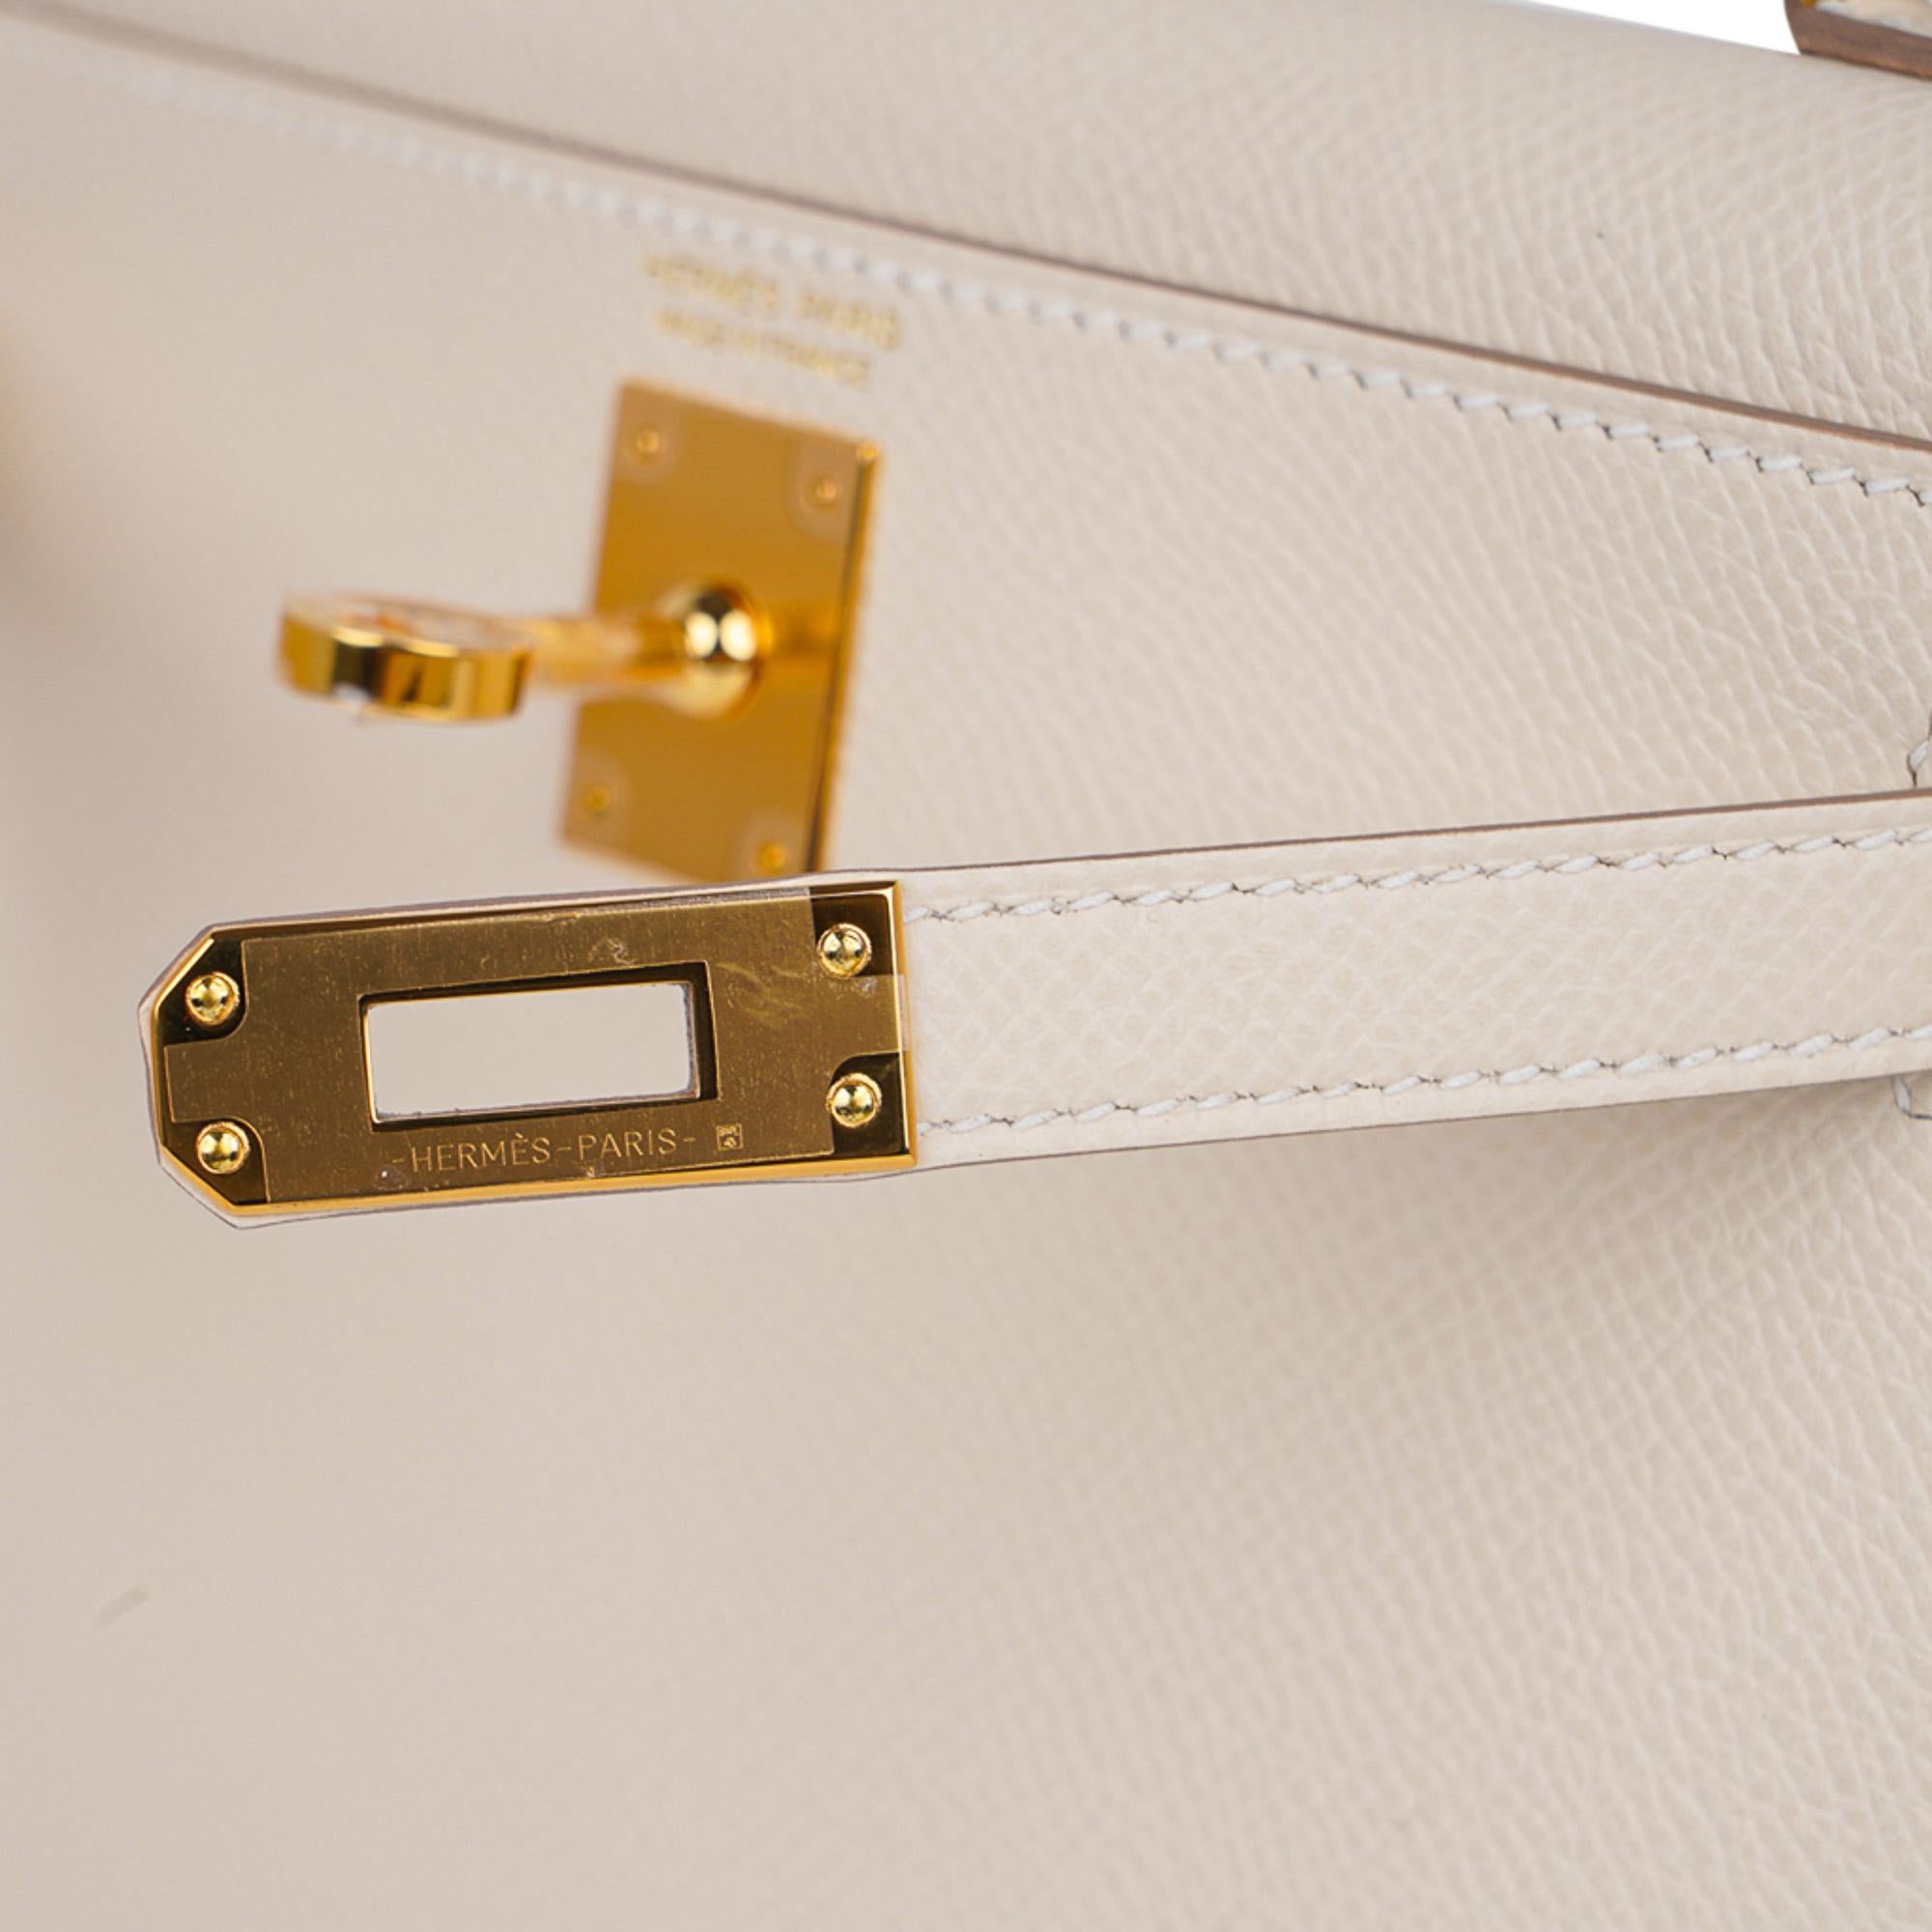 Guaranteed authentic Hermes Kelly 20 Sellier Mini bag.
Coveted neutral Craie Epsom leather with gold hardware.
Carry by hand, shoulder or cross body.
Divine size for day to evening. 
Comes with signature Hermes box, shoulder strap, and sleeper.
NEW